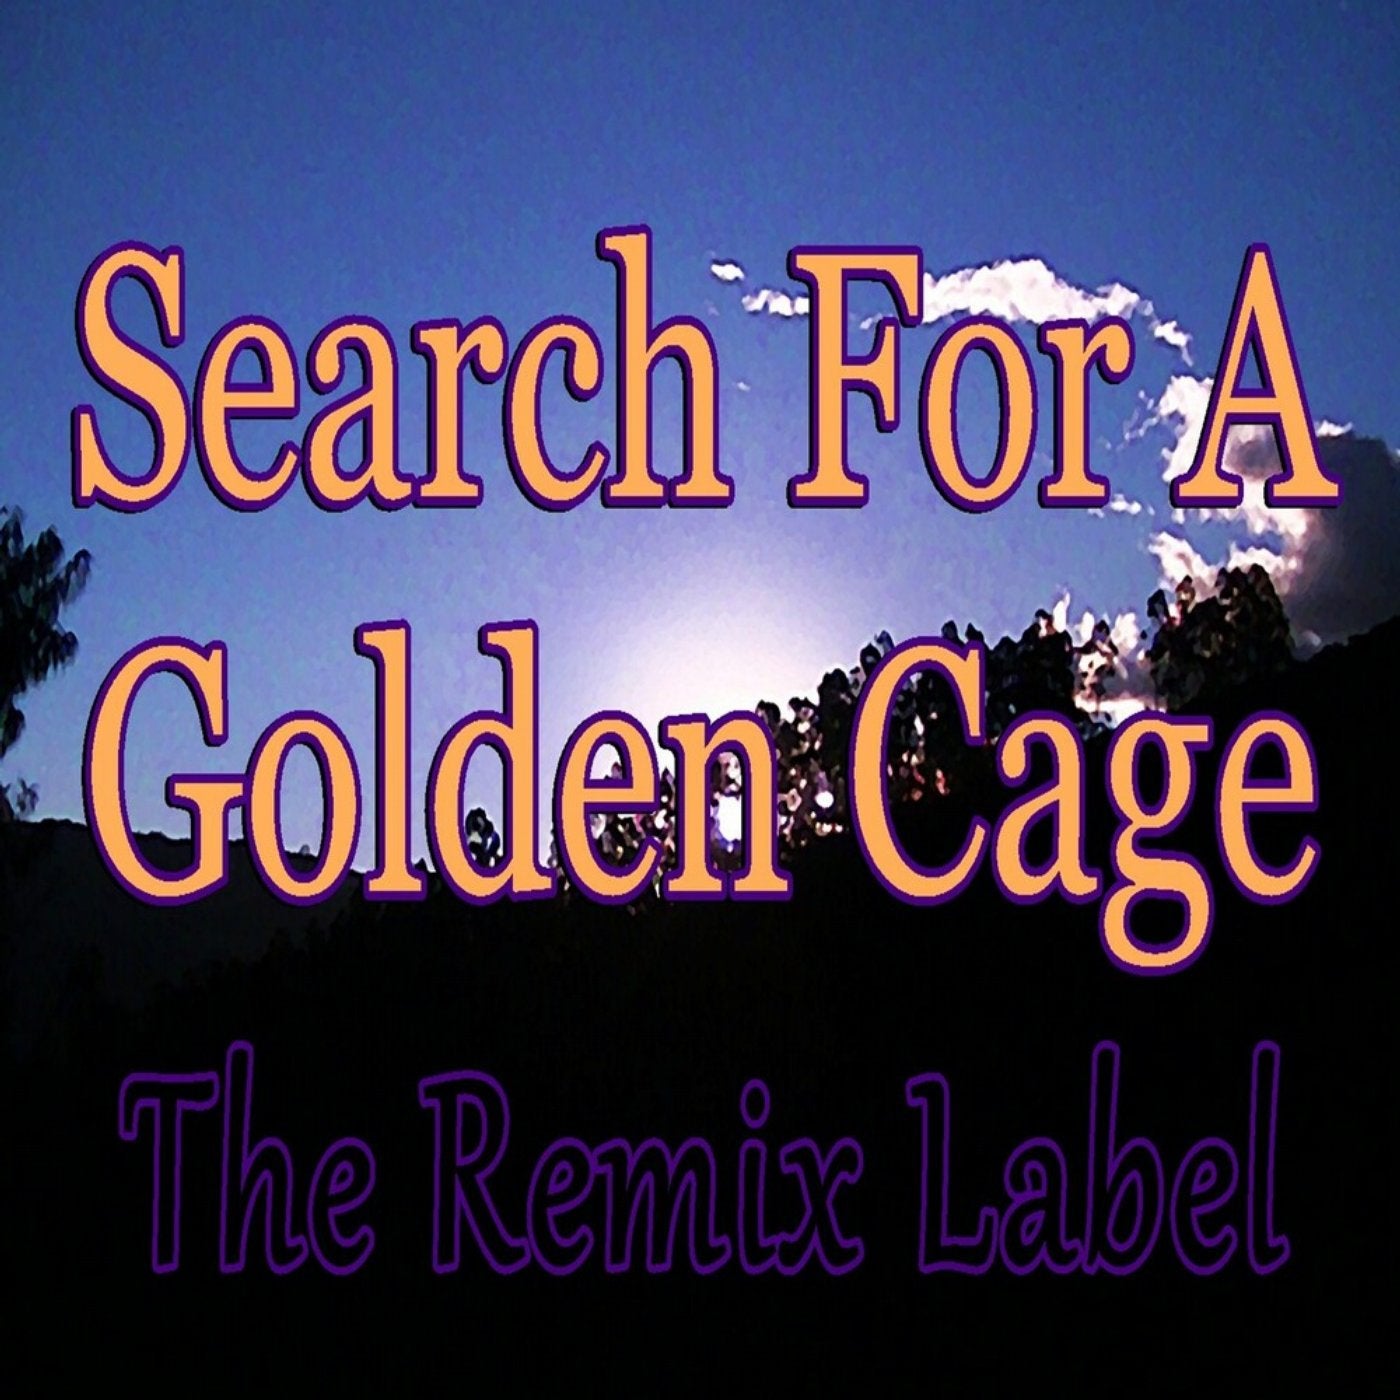 Search for a Golden Cage (2LS2Dance Dubhouse Basement Meets Bunker Deephouse Music)